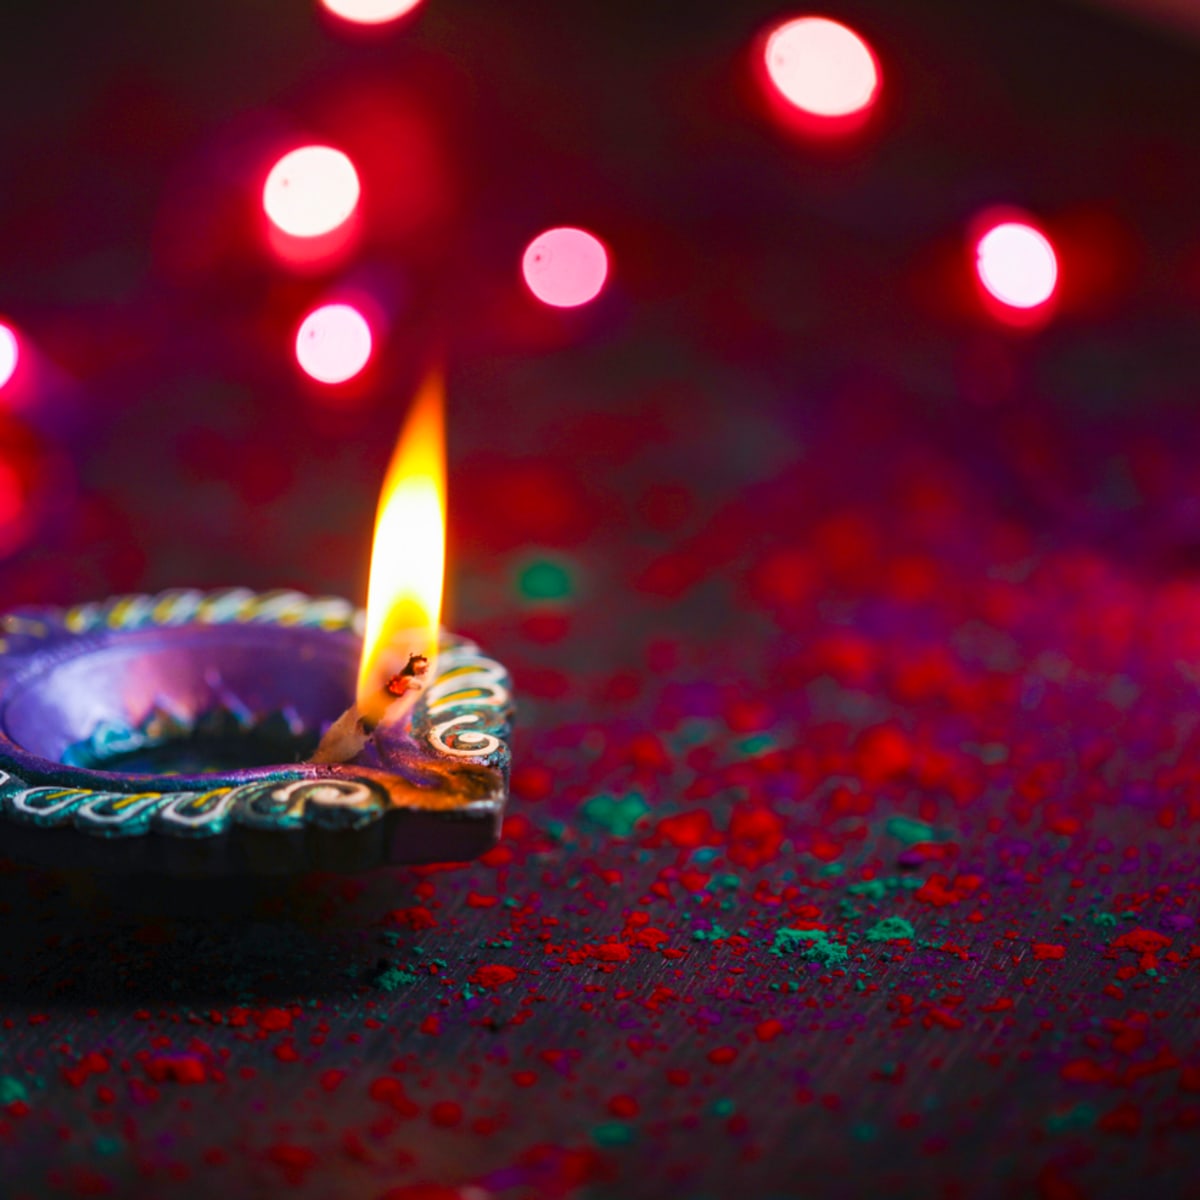 Some Interesting facts about Diwali, you must know